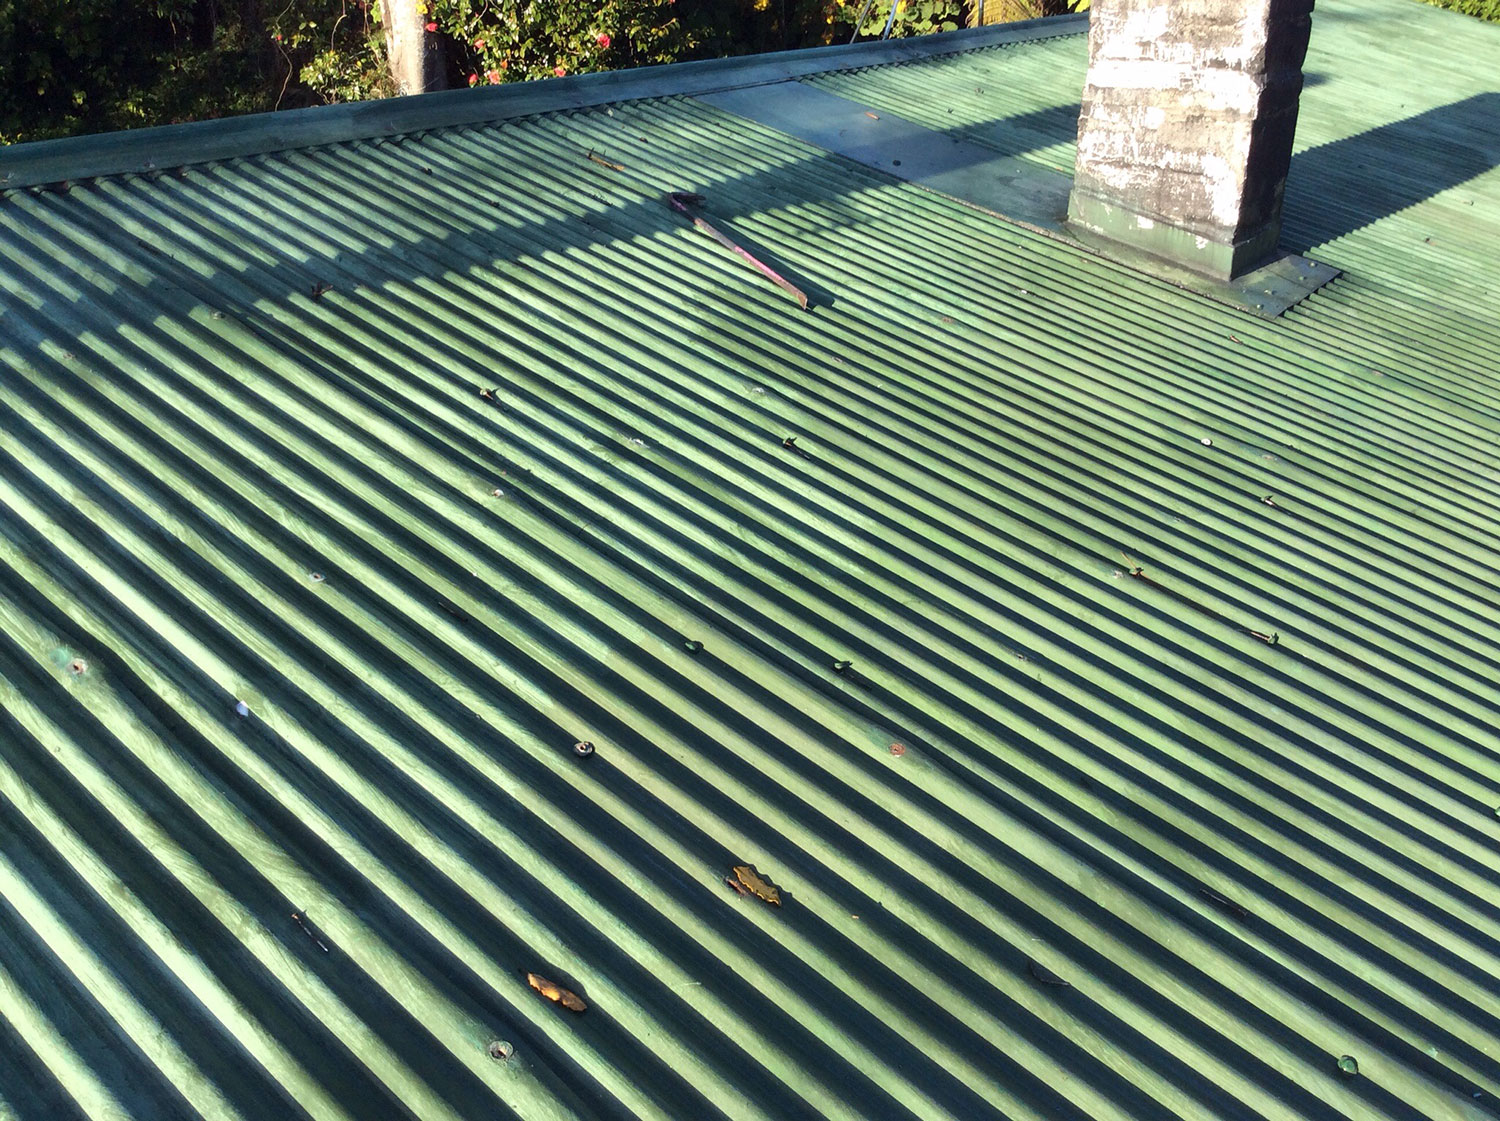 auckland roofing solutions services auckland and new zealand wide new roofs repair cladding and more Project gallery 34